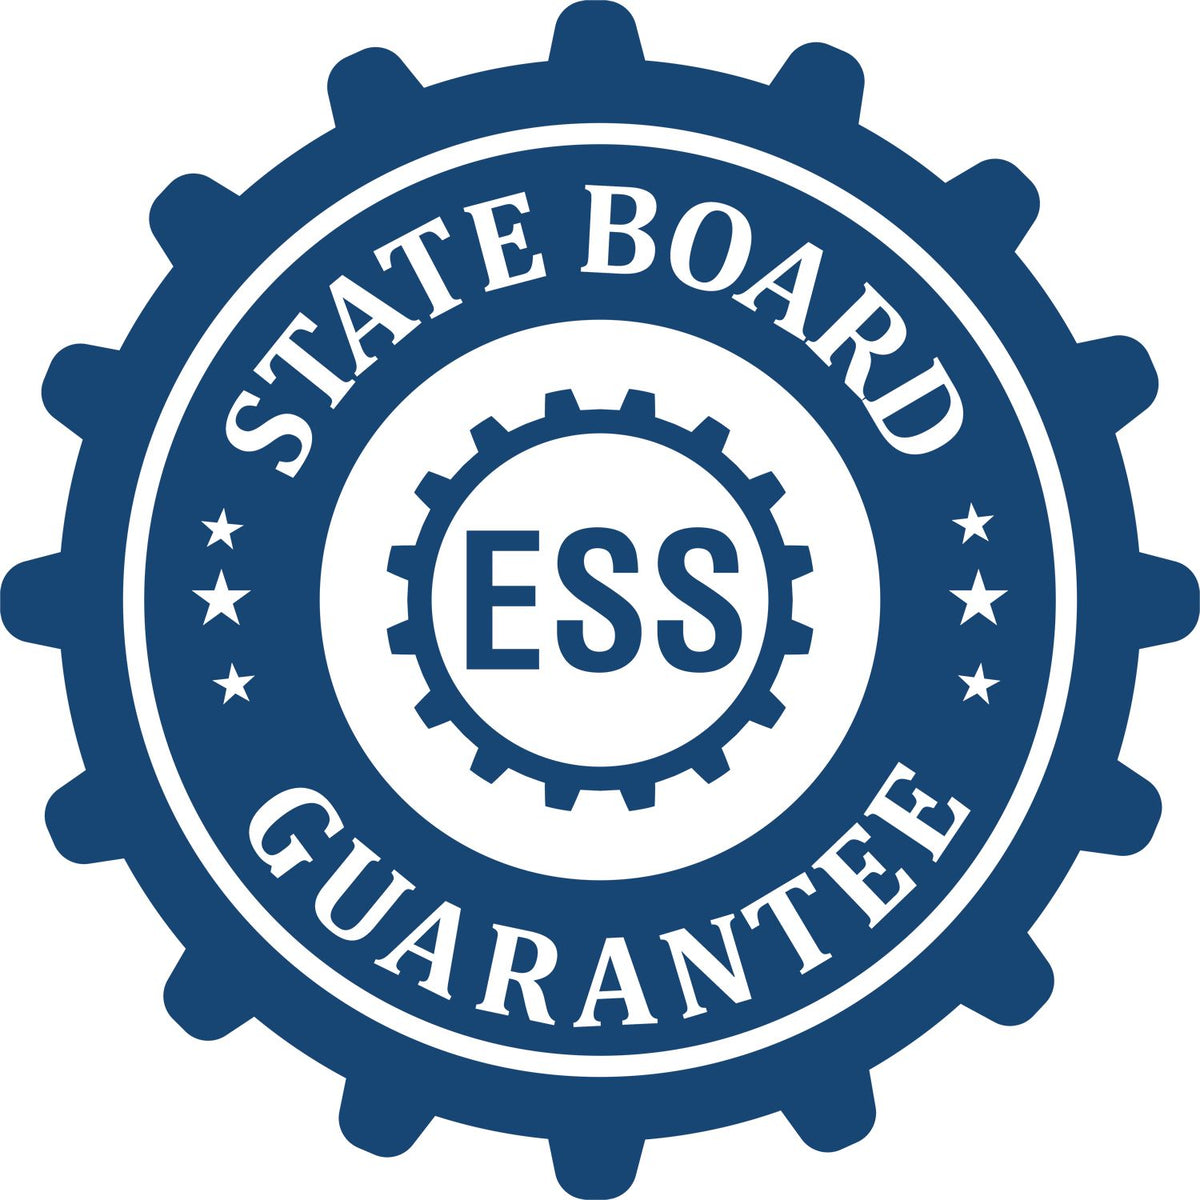 An emblem in a gear shape illustrating a state board guarantee for the Hybrid Vermont Land Surveyor Seal